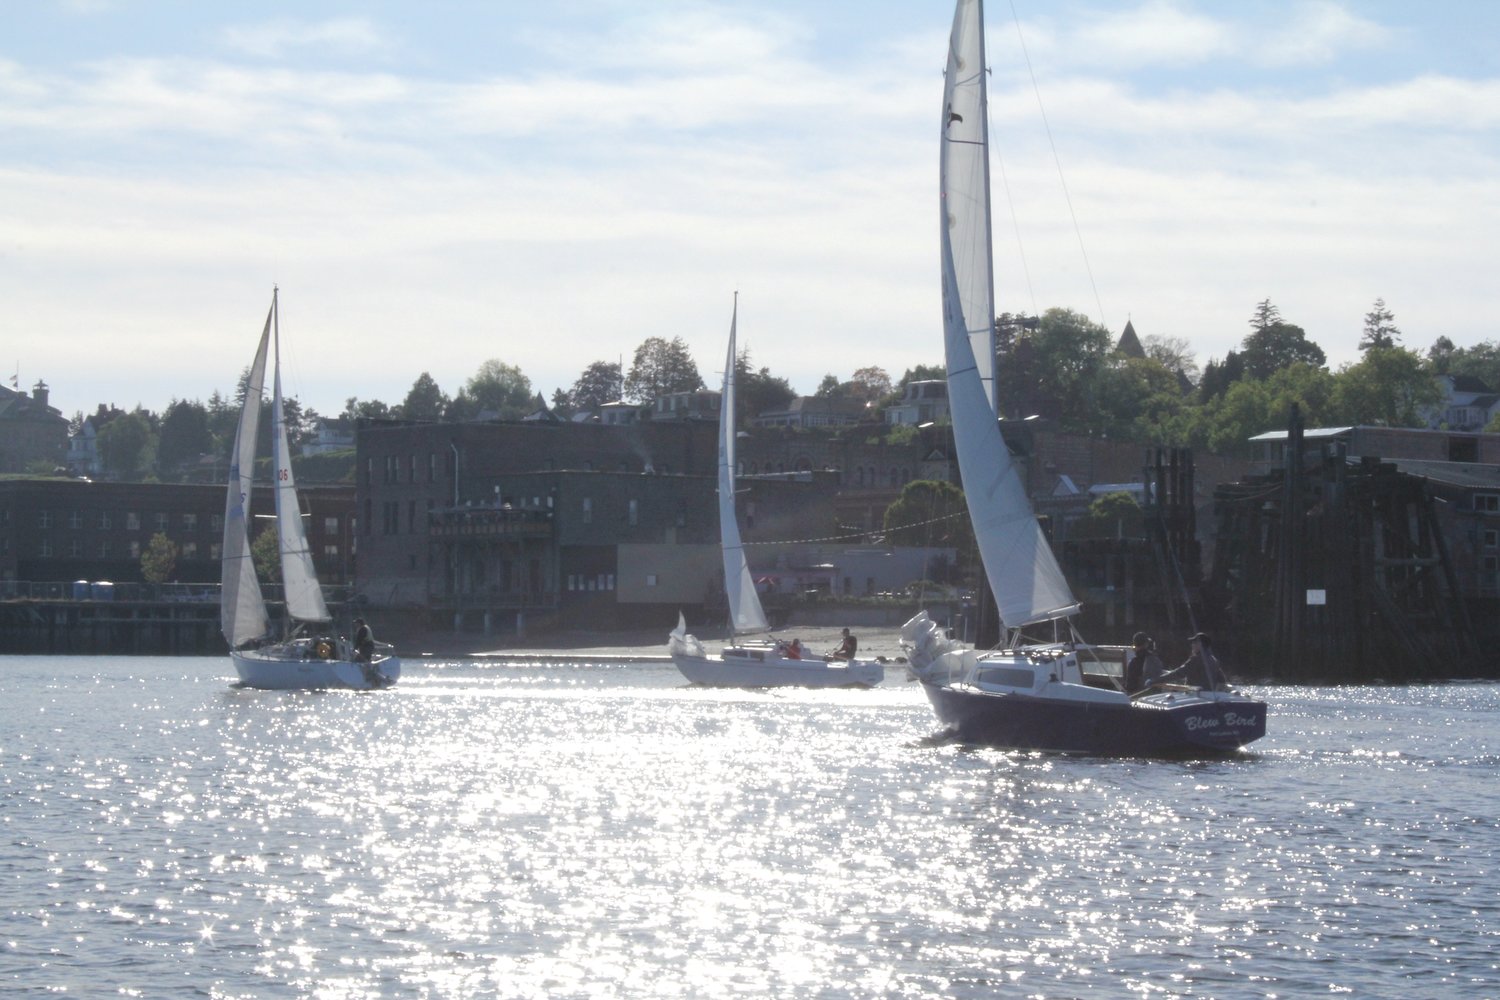 A steady breeze carries racers along the Port Townsend Waterfront prior to the start of Race 6 in the Port Townsend Sailing Association’s Whitecap Series.